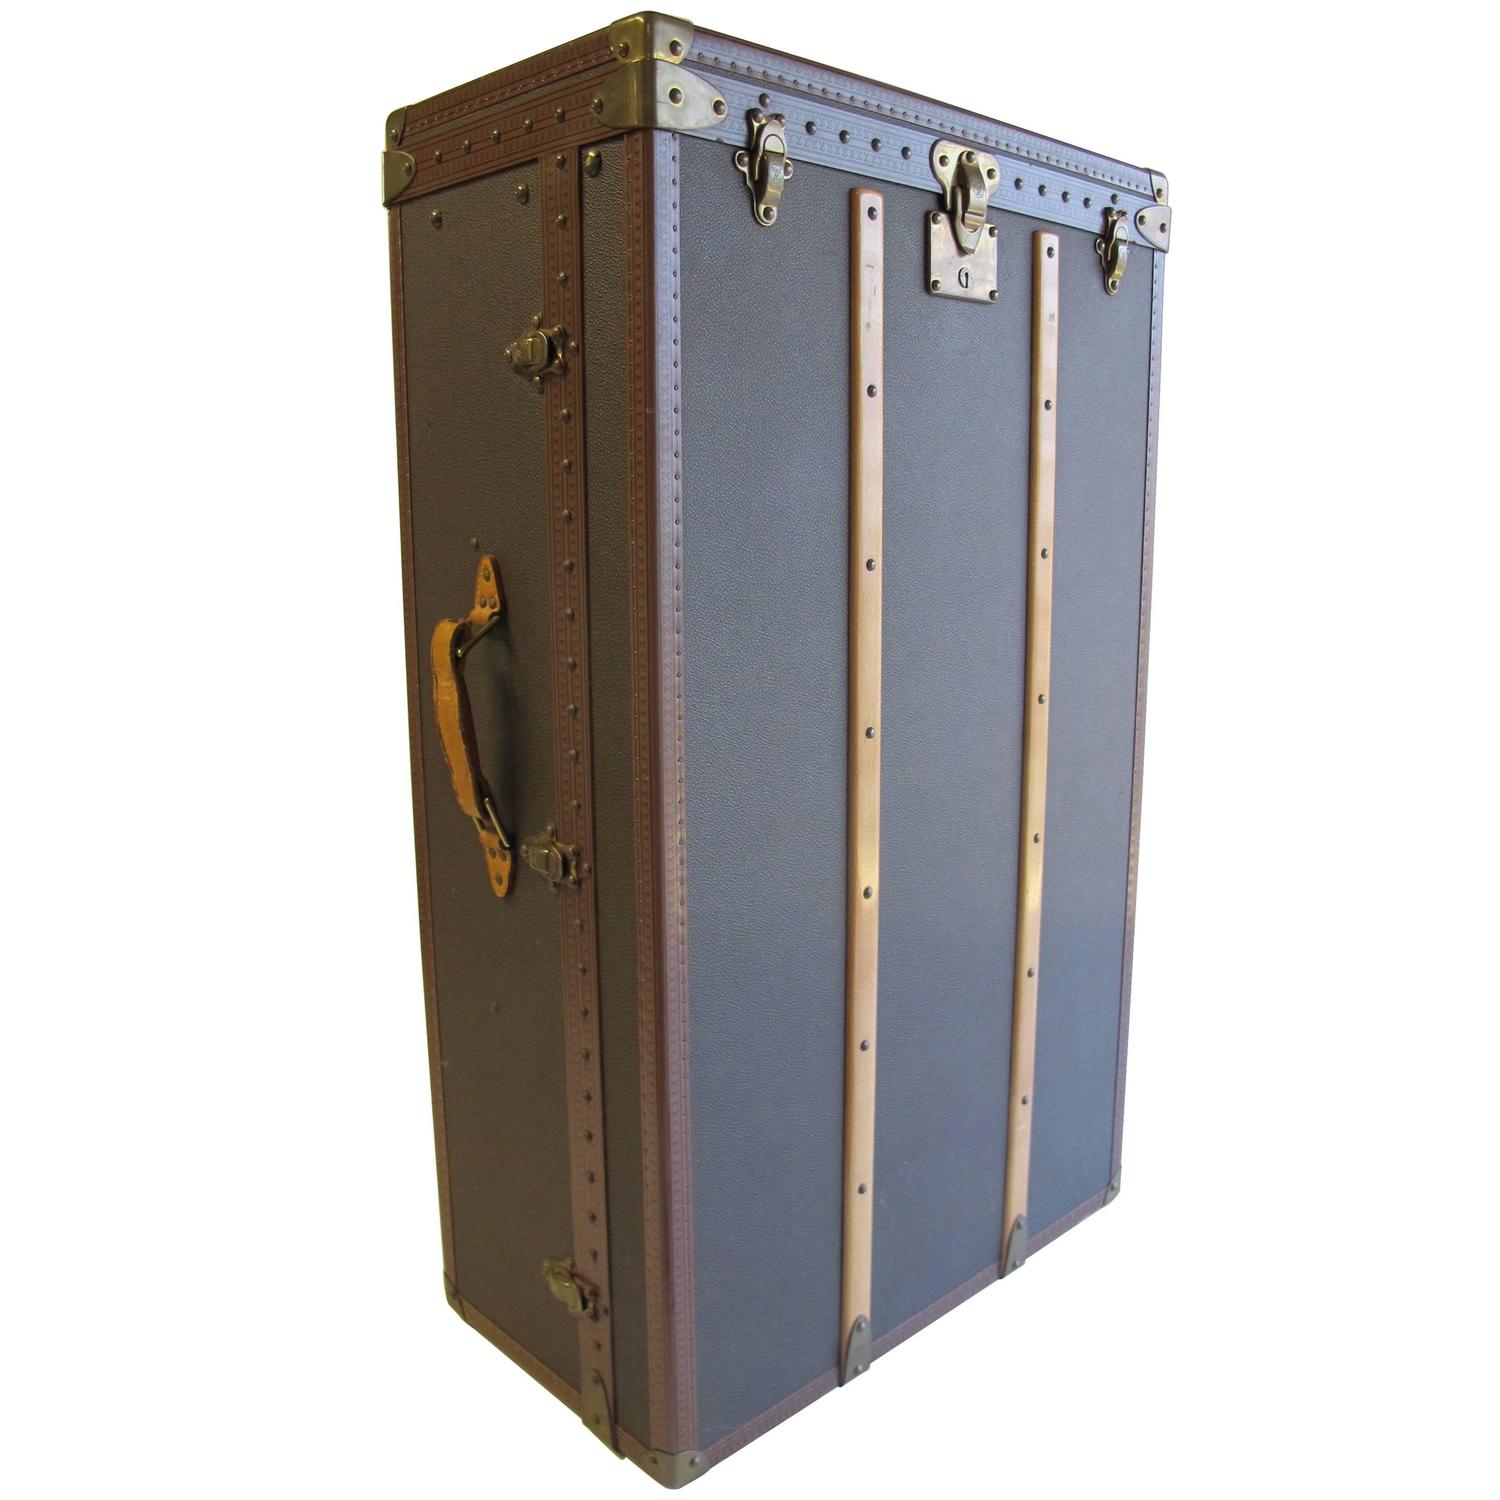 Unique Custom-Made Louis Vuitton Wardrobe Trunk For Sale at 1stdibs